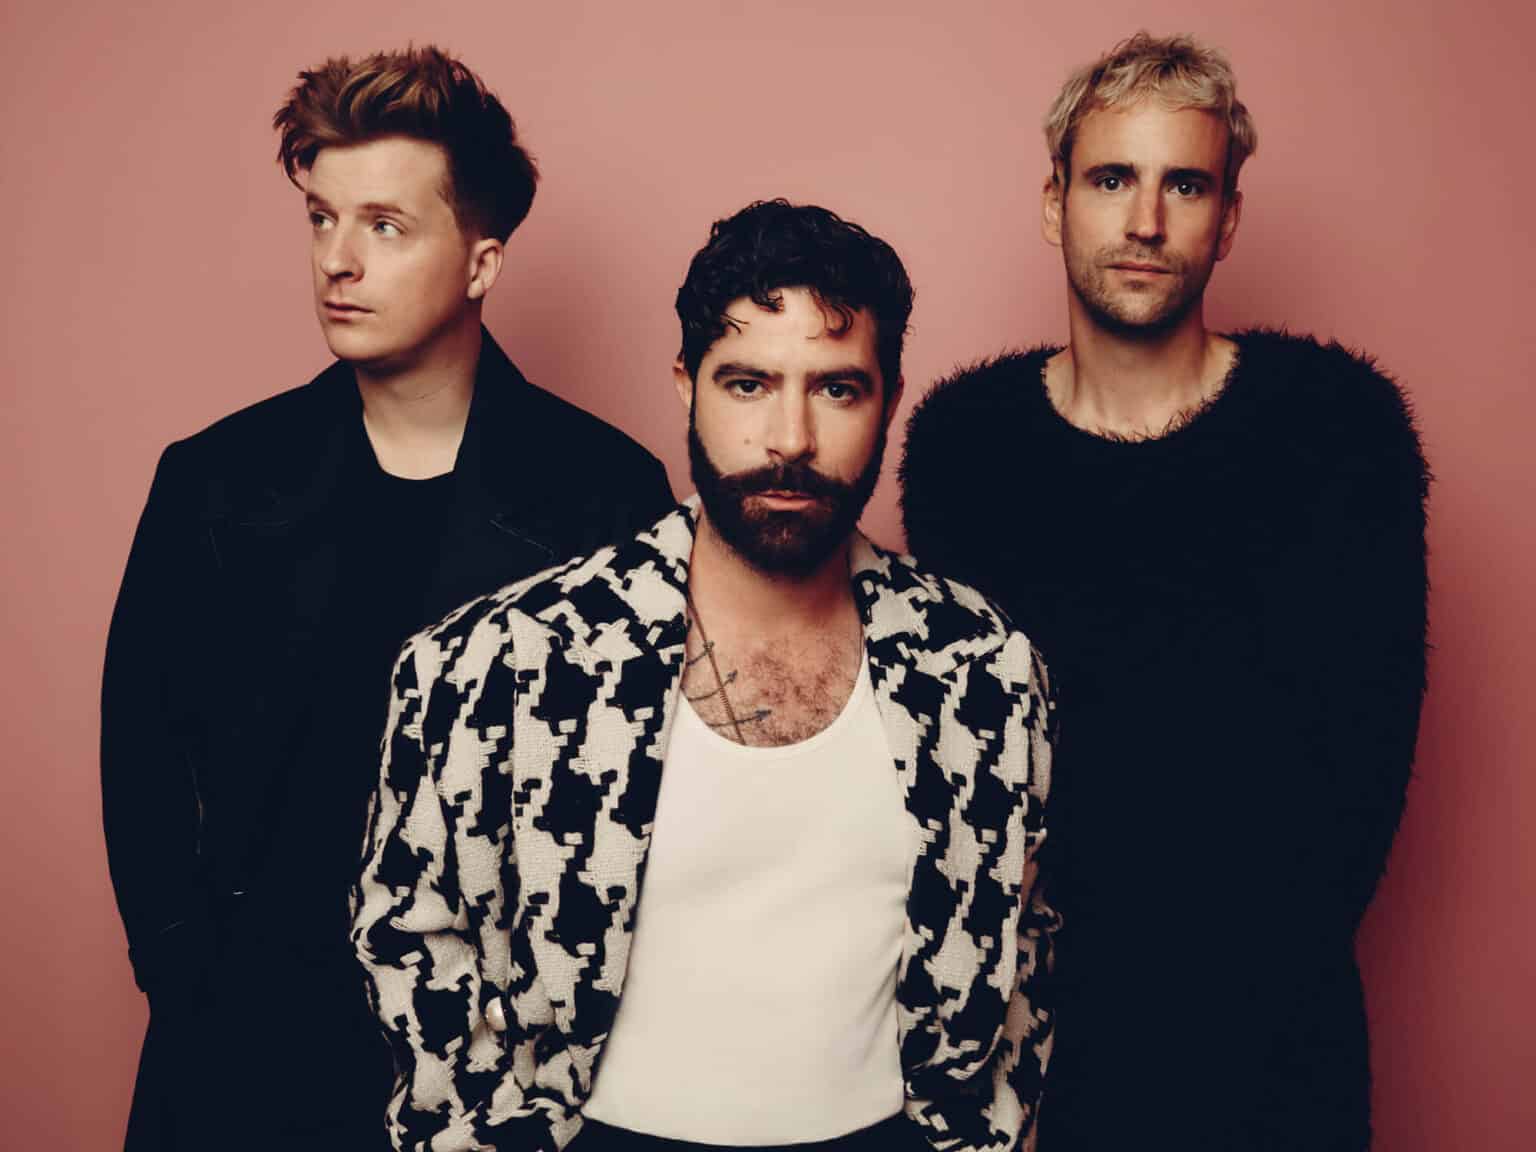 The three members of Foals are wearing black and white, standing in front of a brown wall